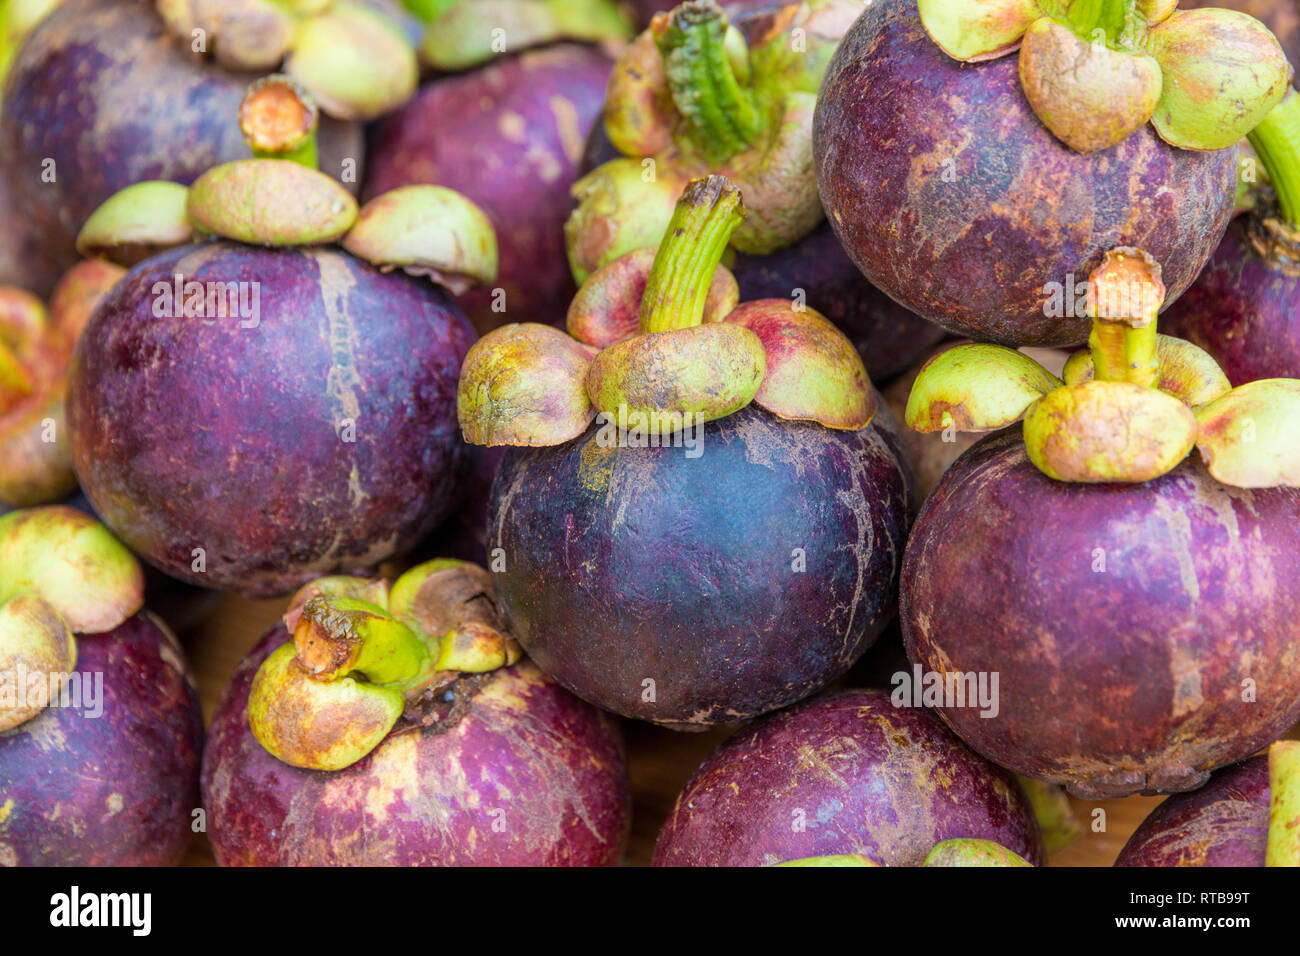 Nice high-angle view of many ripe purple mangosteen fruits (Garcinia mangostana) stacked on top of each other. Grown organically and freshly harvested... Stock Photo